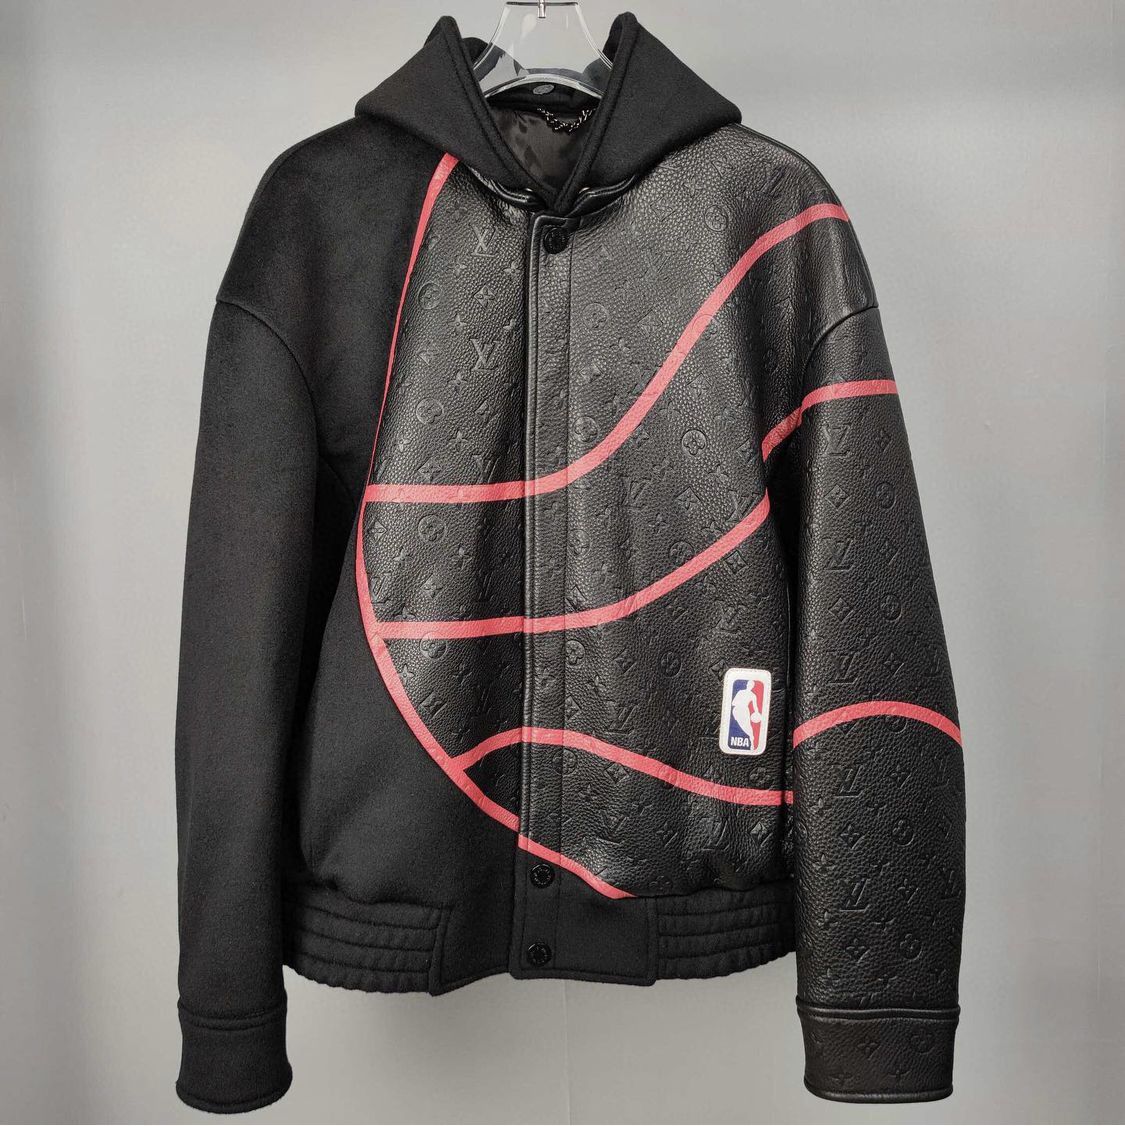 LV X NBA PLAYER LEATHER MIX JACKET SIZE XL for Sale in